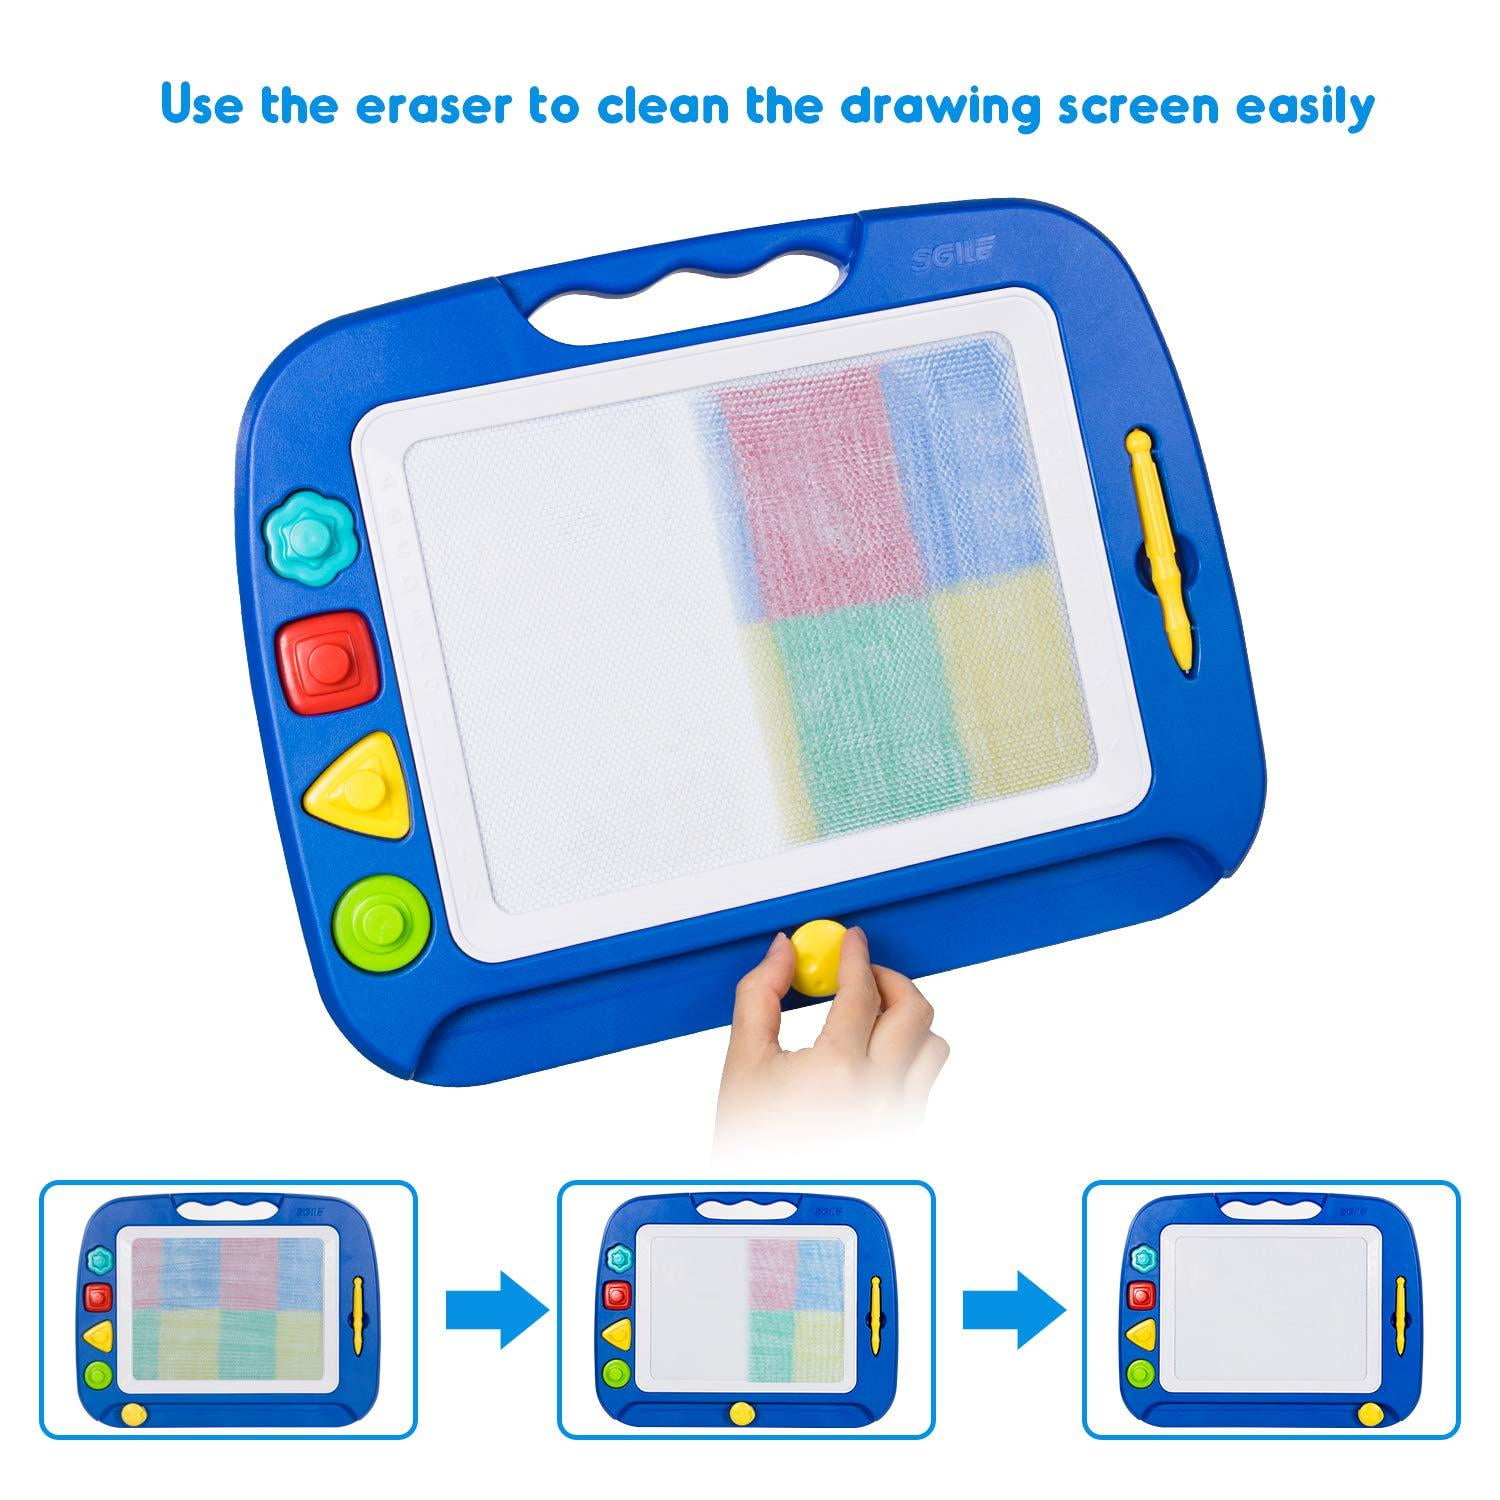 Details about   Draw and Erase Board with pen & 2 stampers 4 color 5 inch screen by Grinstudios 